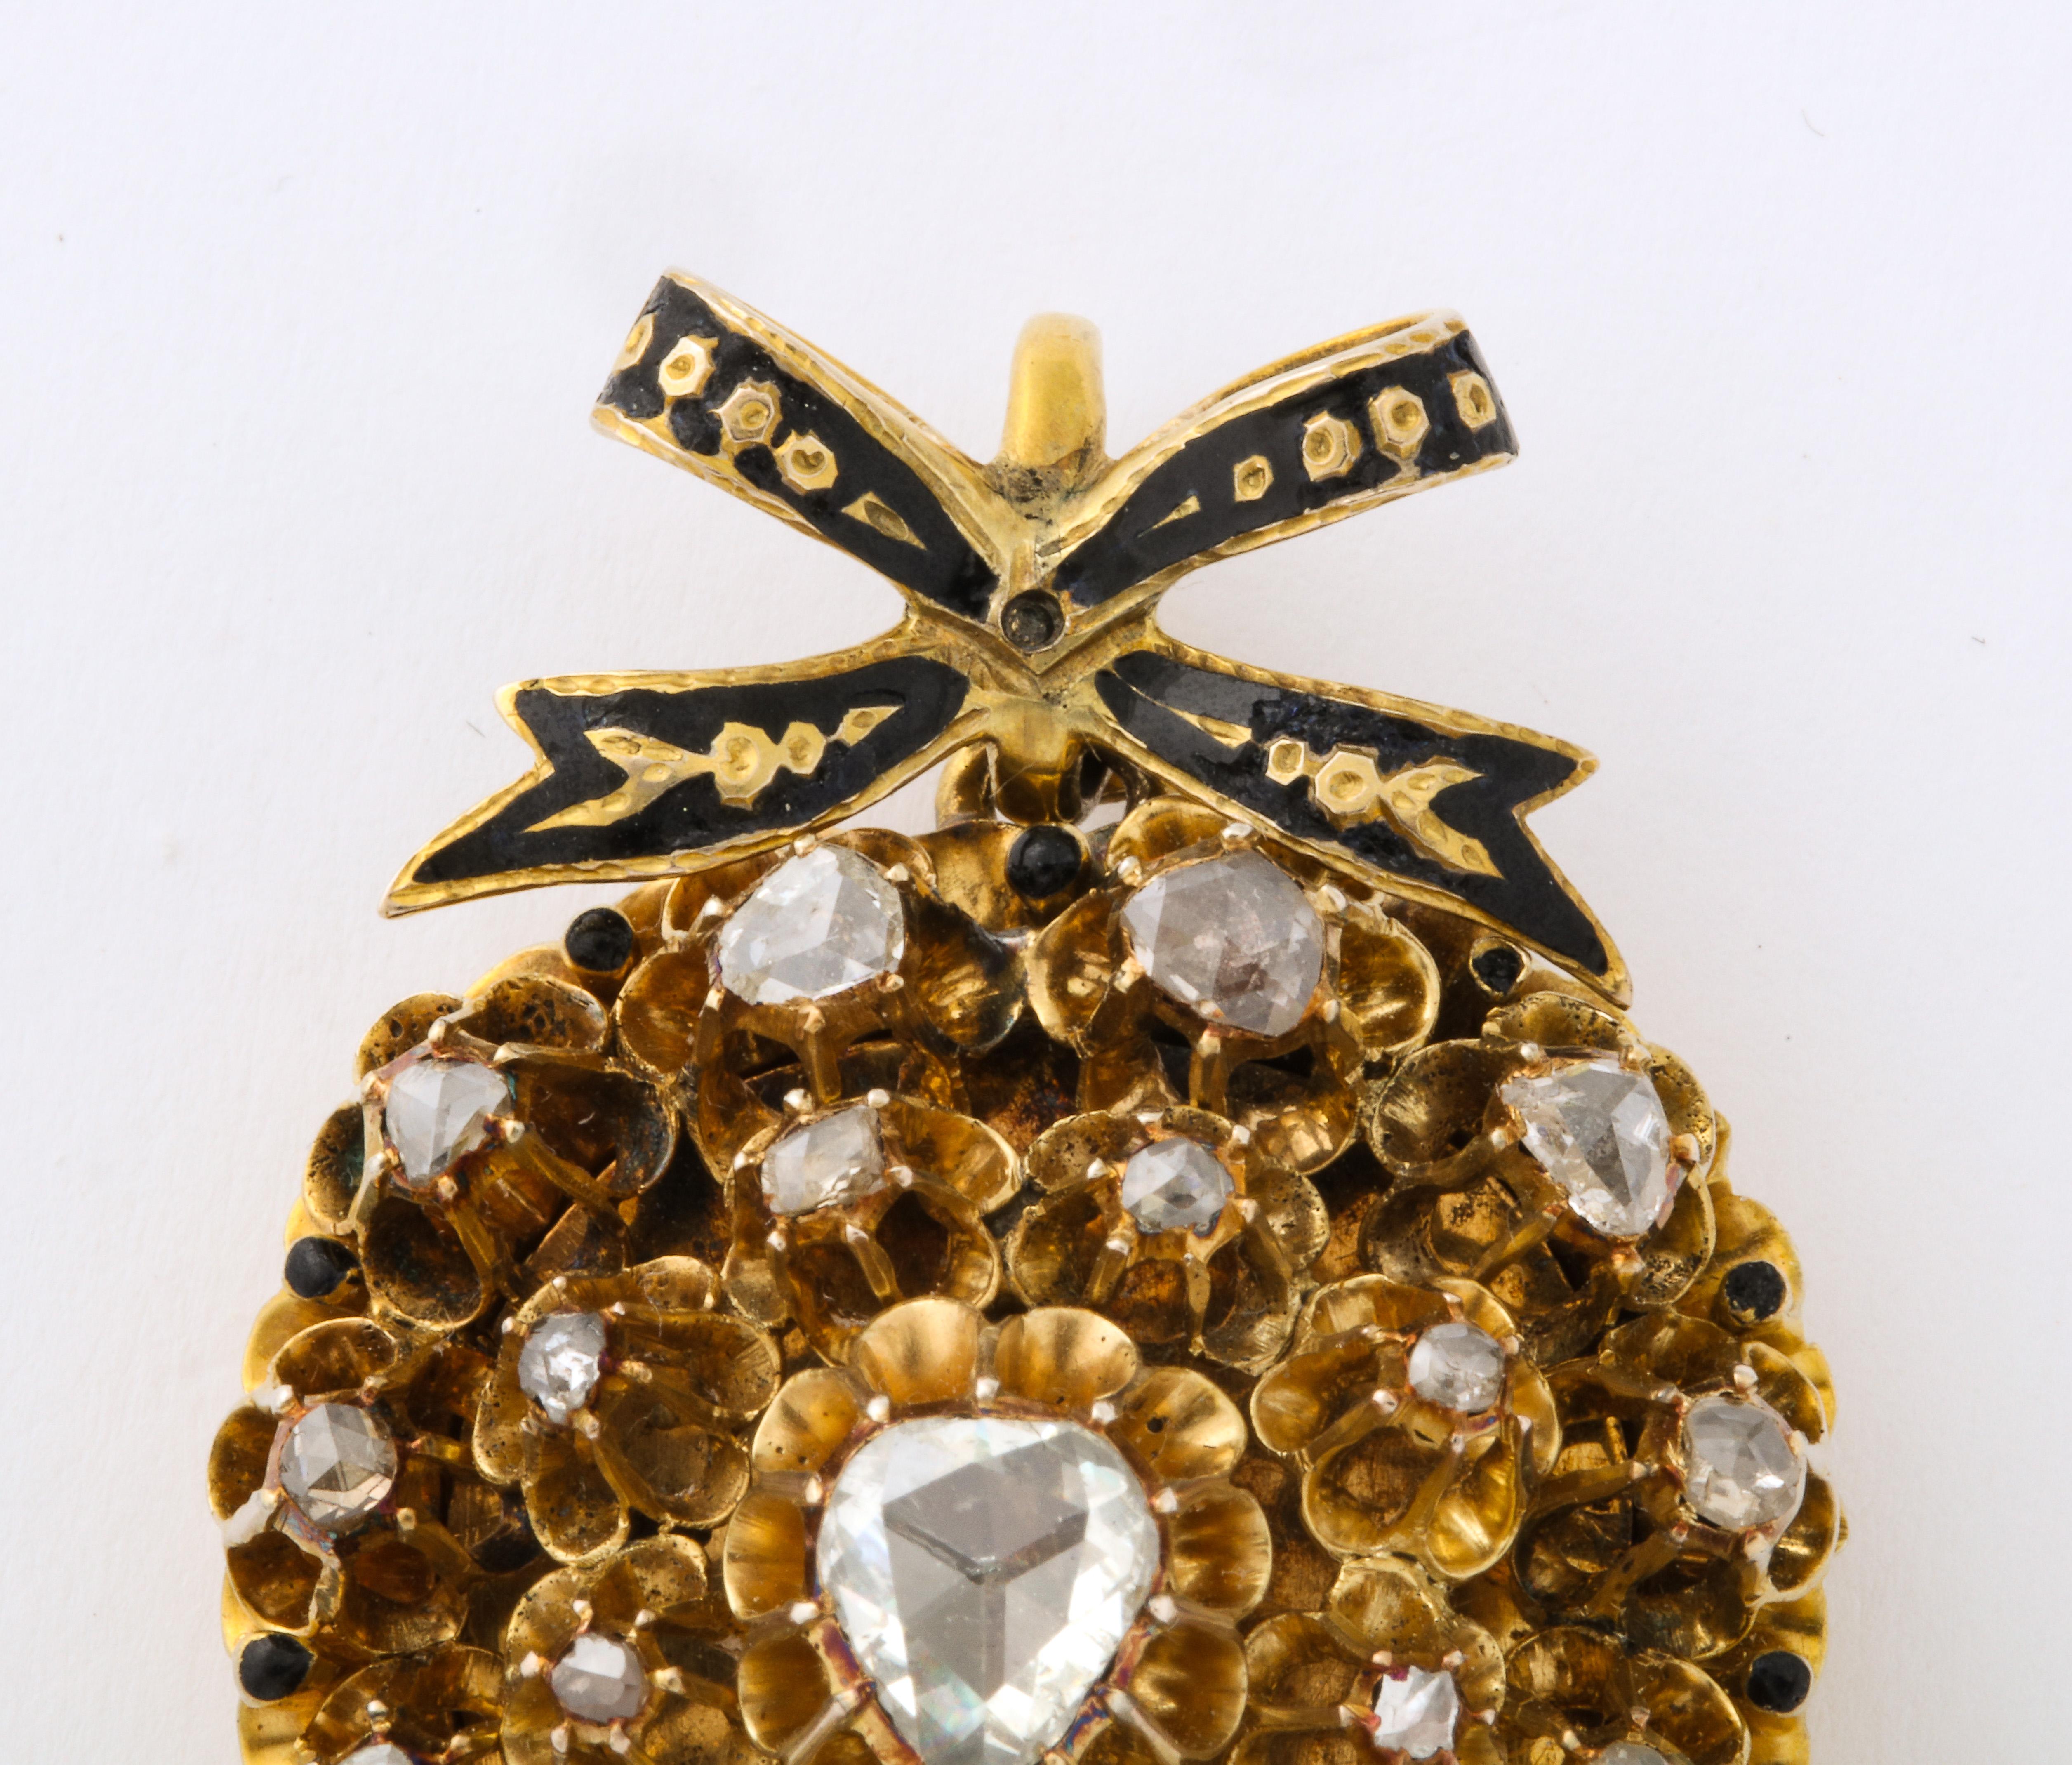 A stunning floral antique rose diamond heart locket with gold petals around a diamond center surround a heart shaped diamond. A French enameled bow sits atop hiding the chain loop. The back reveals a place where a picture was stored behind glass.